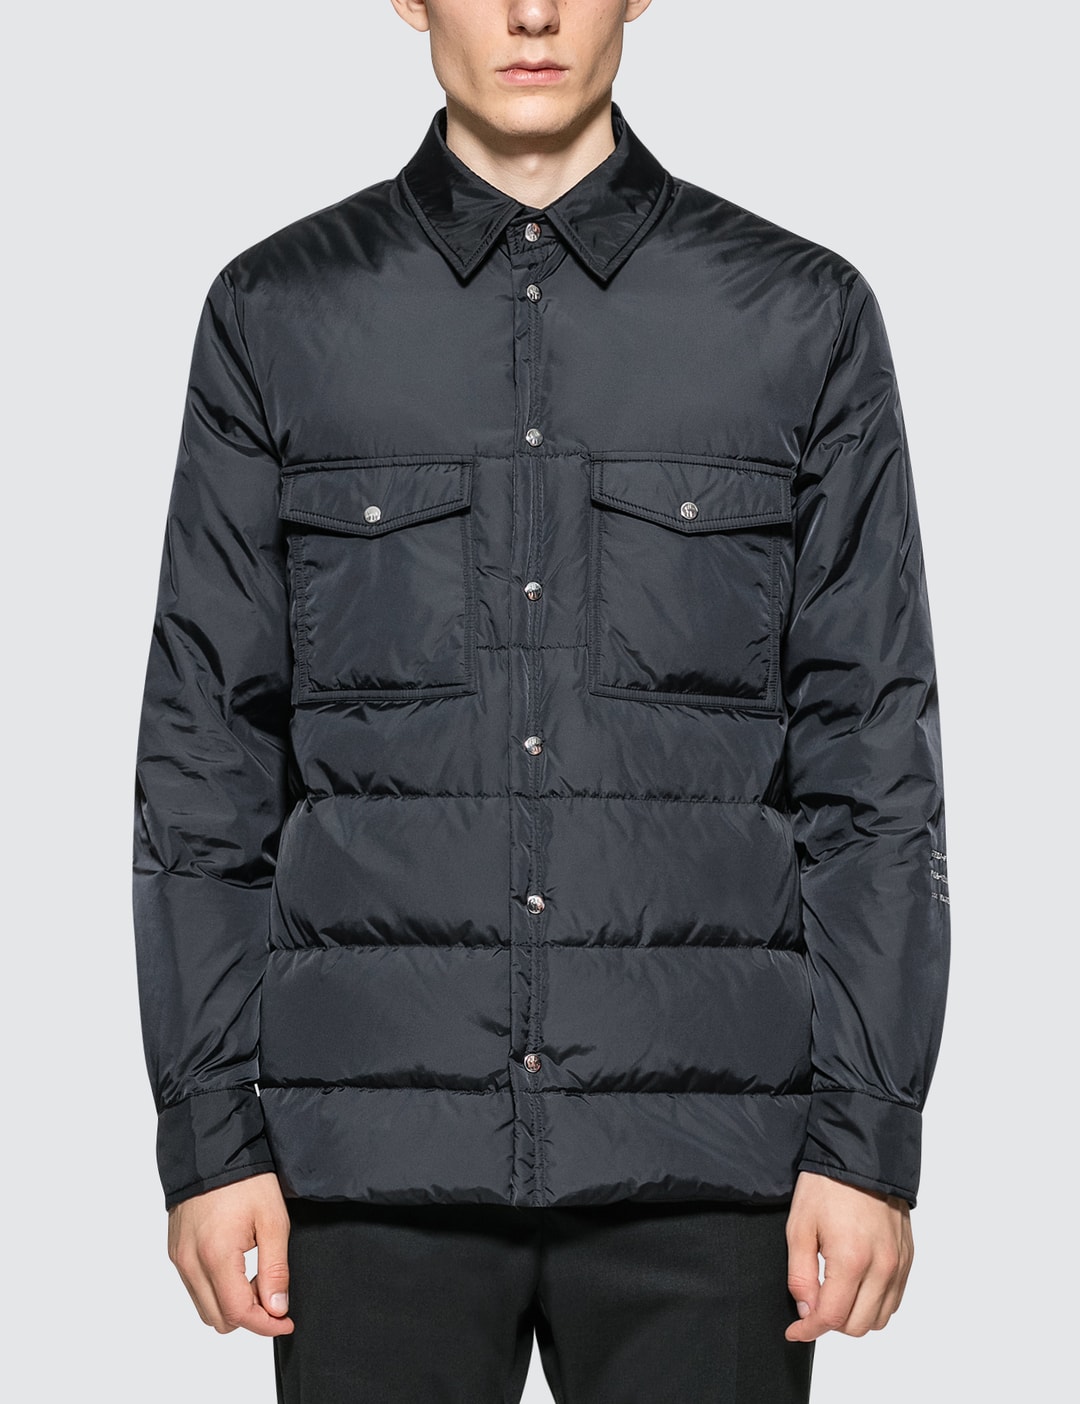 Moncler Genius - Moncler x Fragment Design Maze Jacket | HBX - Globally  Curated Fashion and Lifestyle by Hypebeast